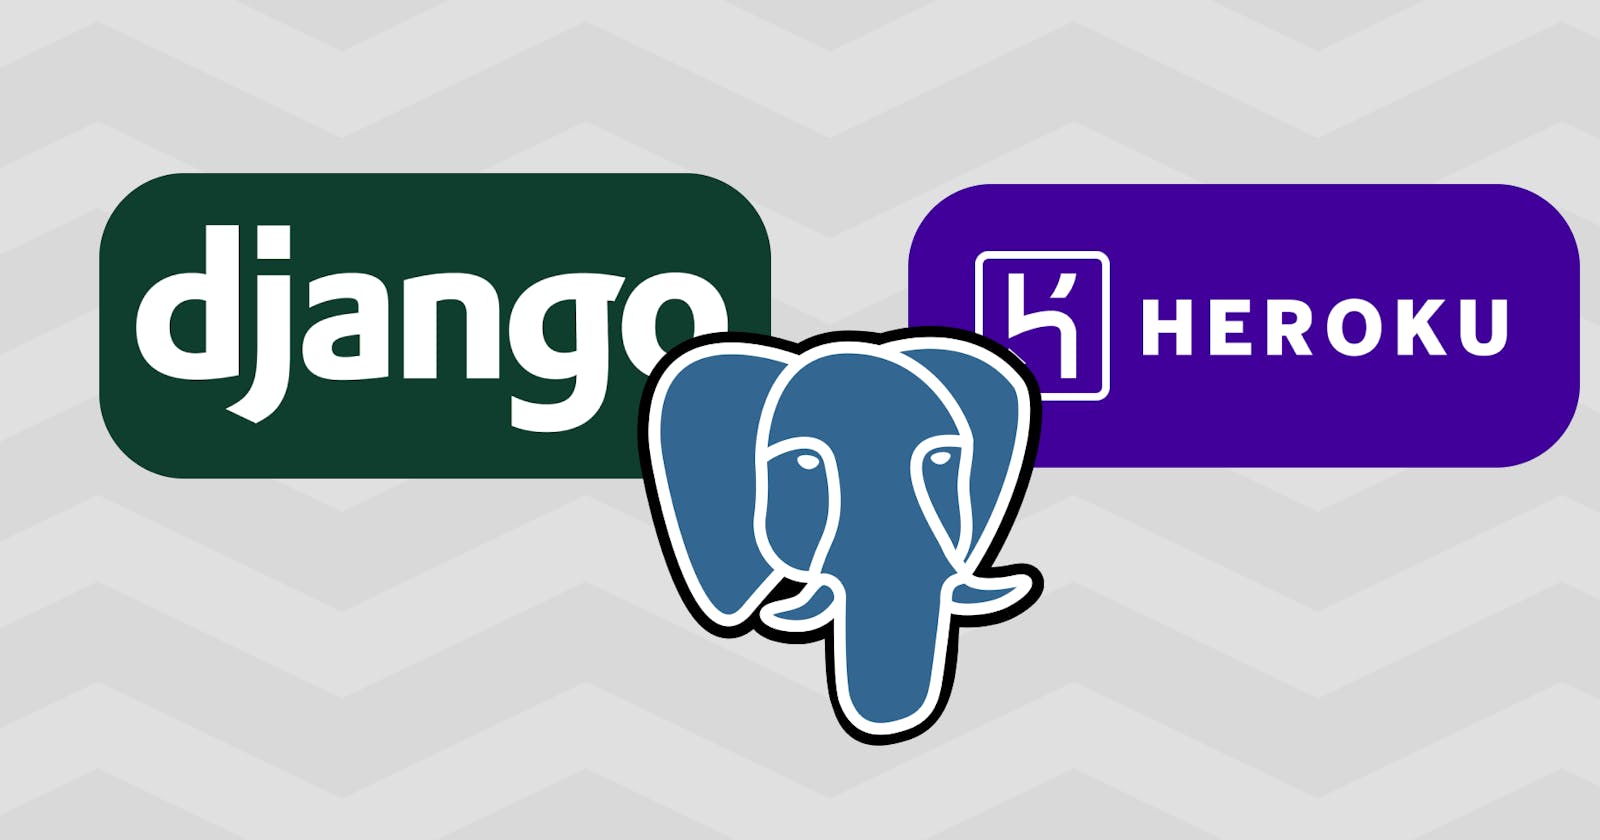 How to use PostgreSQL Database in a Django Project